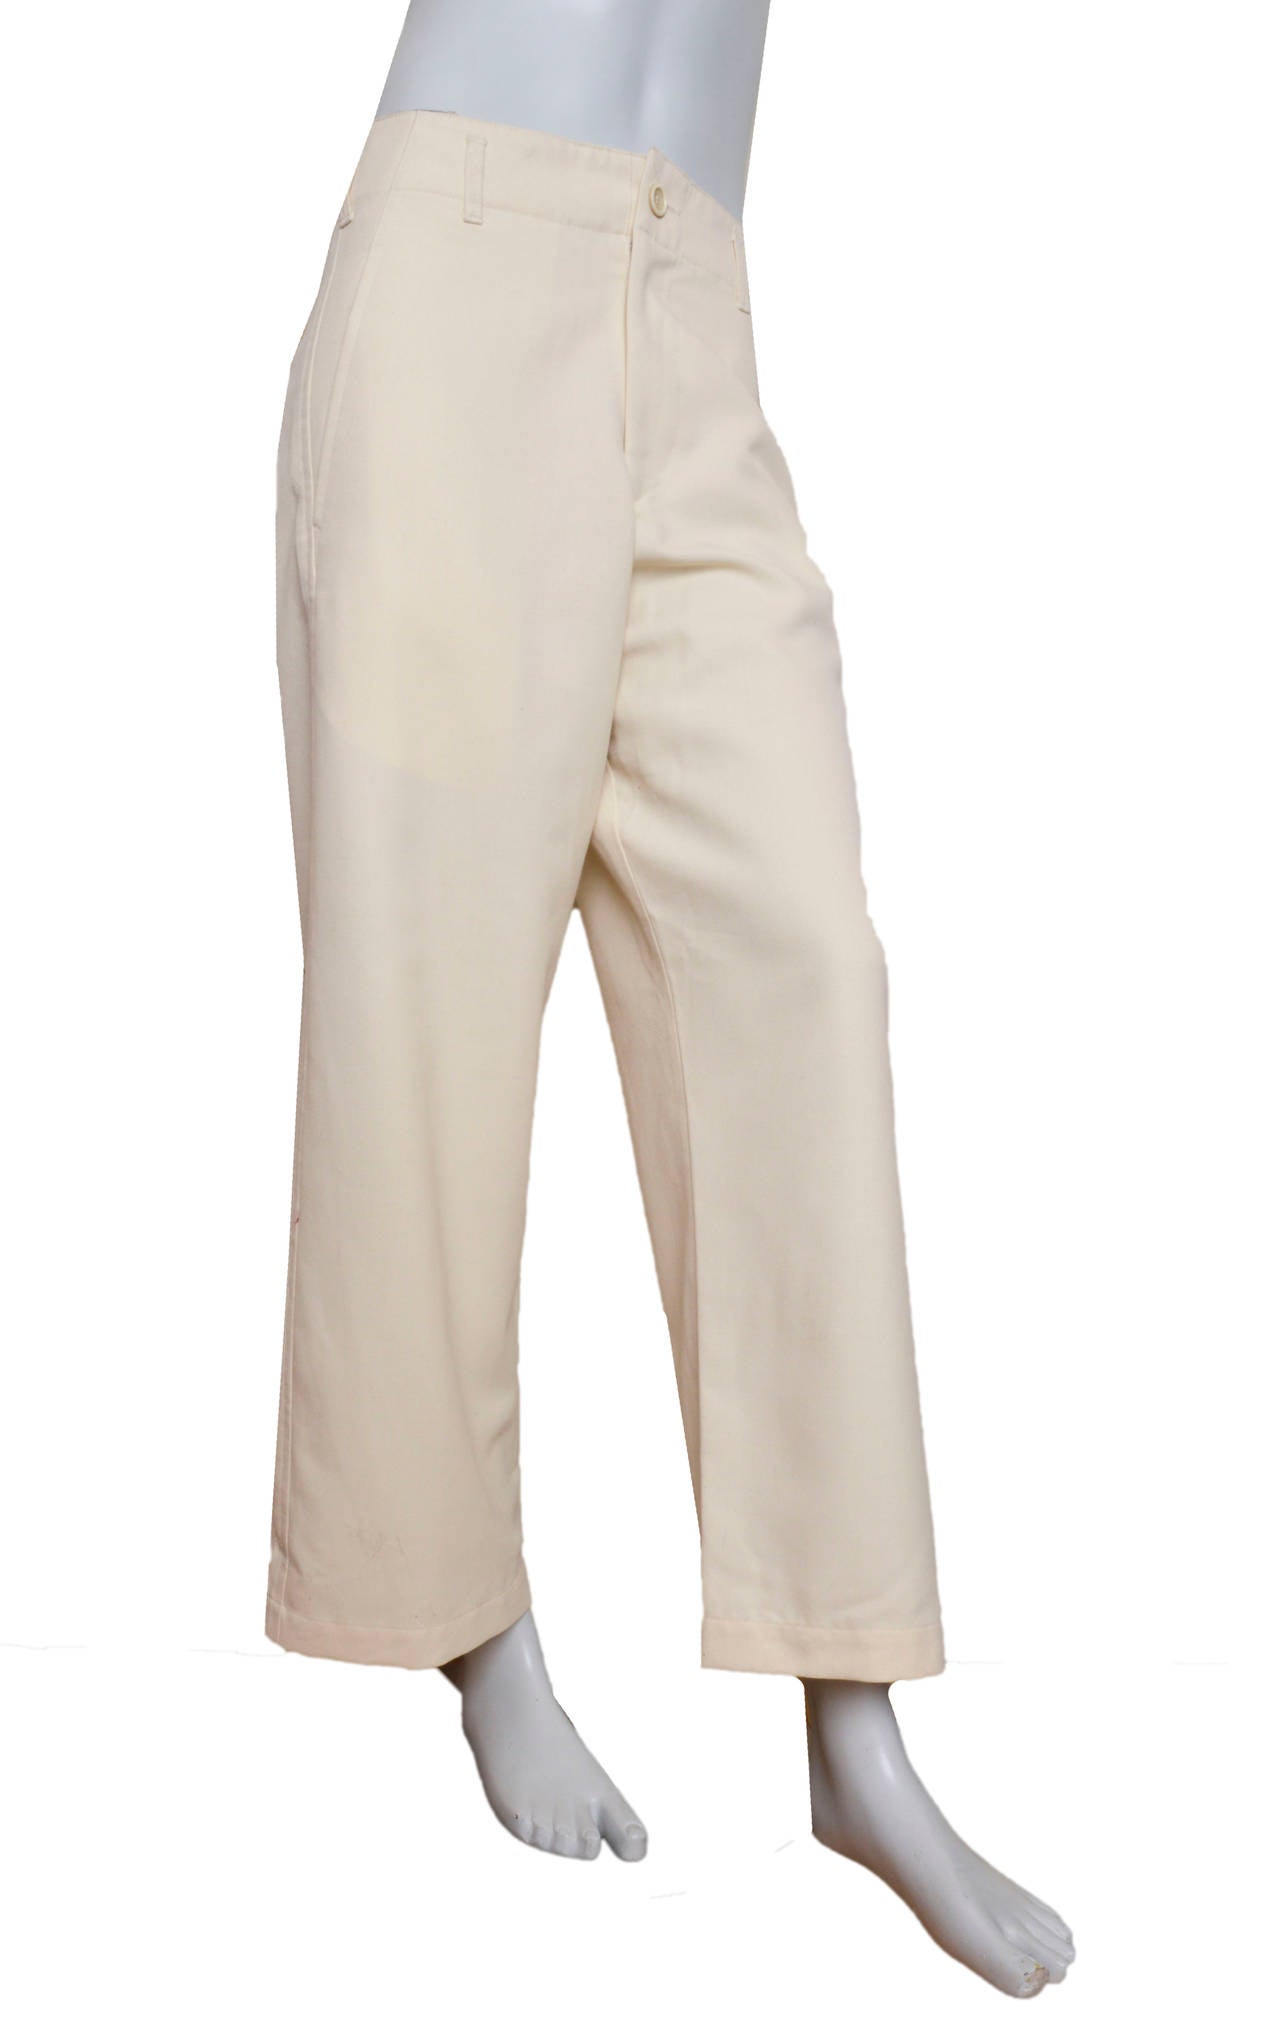 Flattering Comme Des Garcons wide leg trousers.
Cream color.
Very high 13